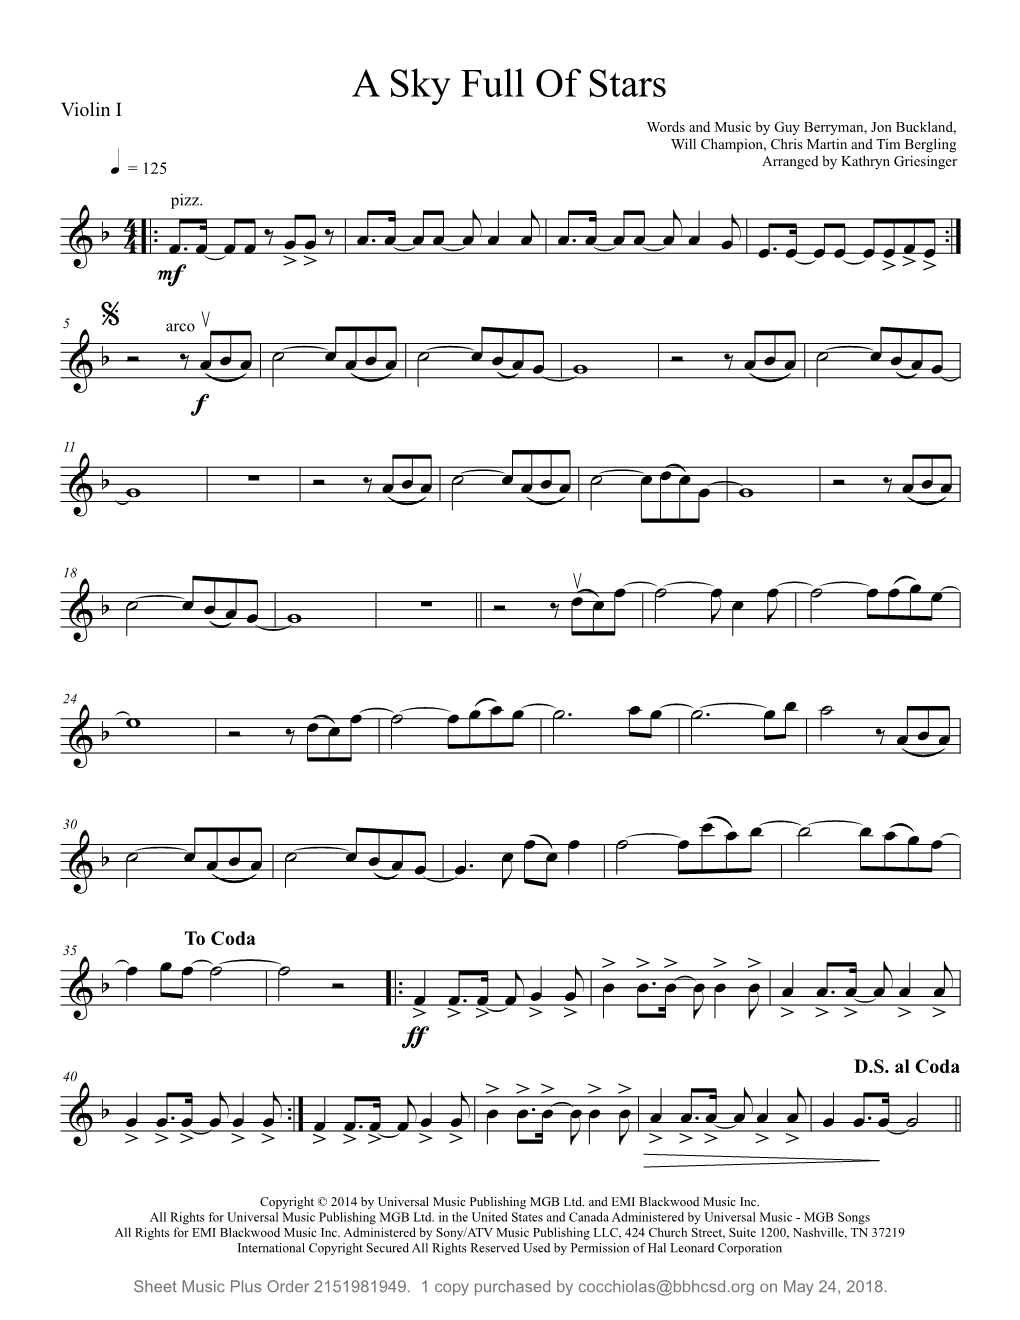 A Sky Full of Stars Violin I Words and Music by Guy Berryman, Jon Buckland, Will Champion, Chris Martin and Tim Bergling = 125 Arranged by Kathryn Griesinger  Pizz